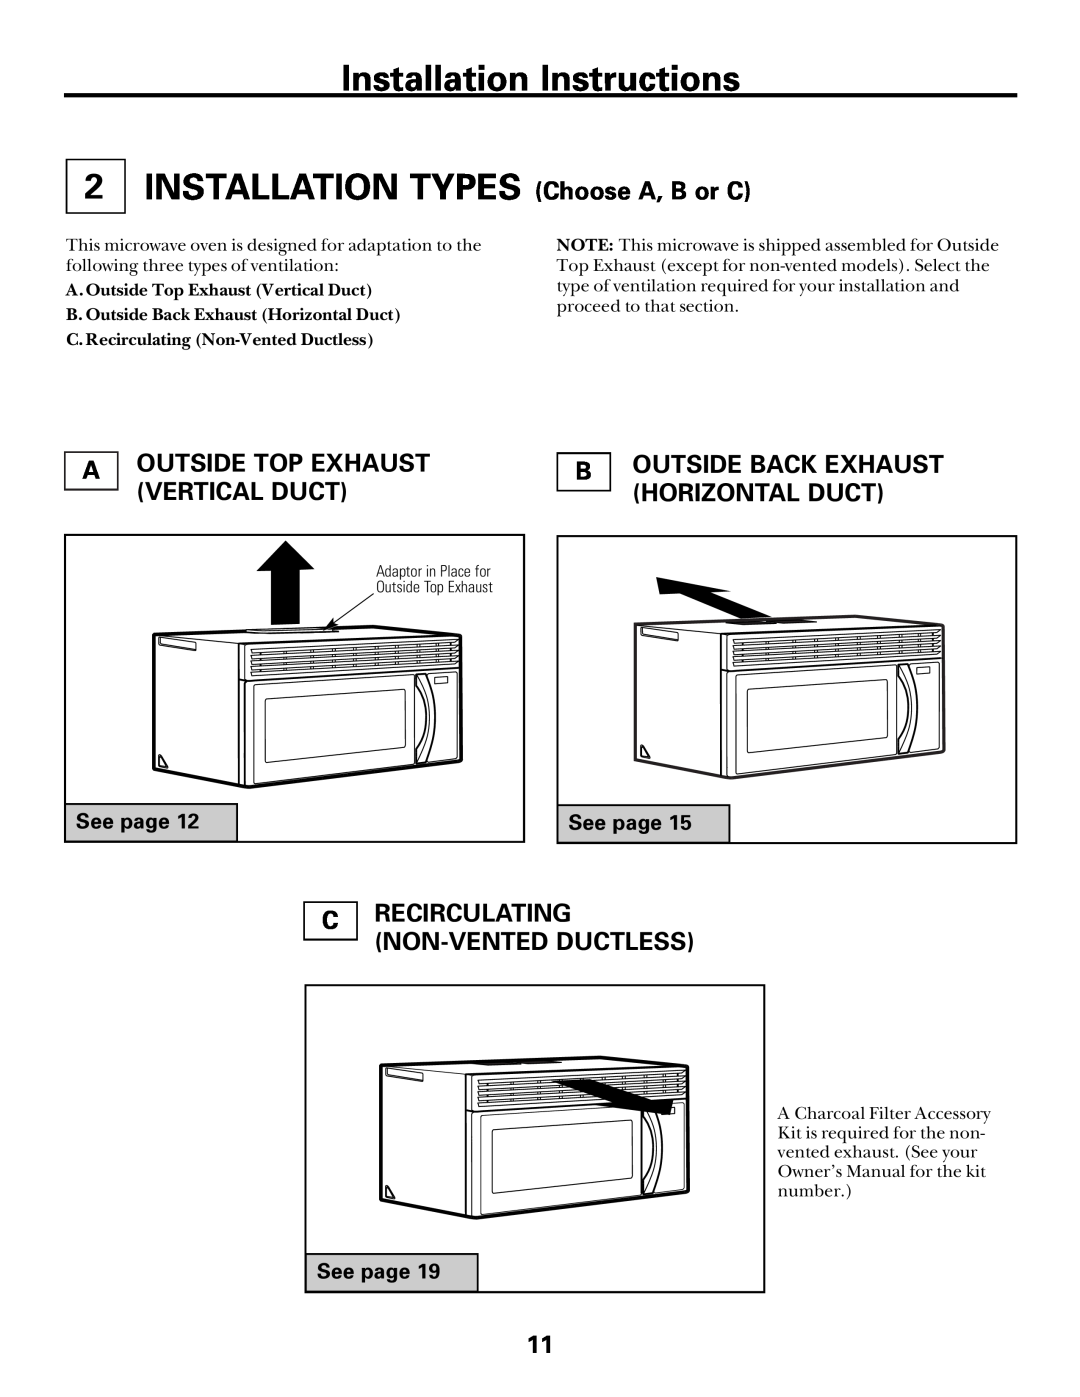 GE Over the Range Microwave Oven manual INSTALLATION TYPES Choose A, B or C, Outside Top Exhaust Vertical Duct, See page 